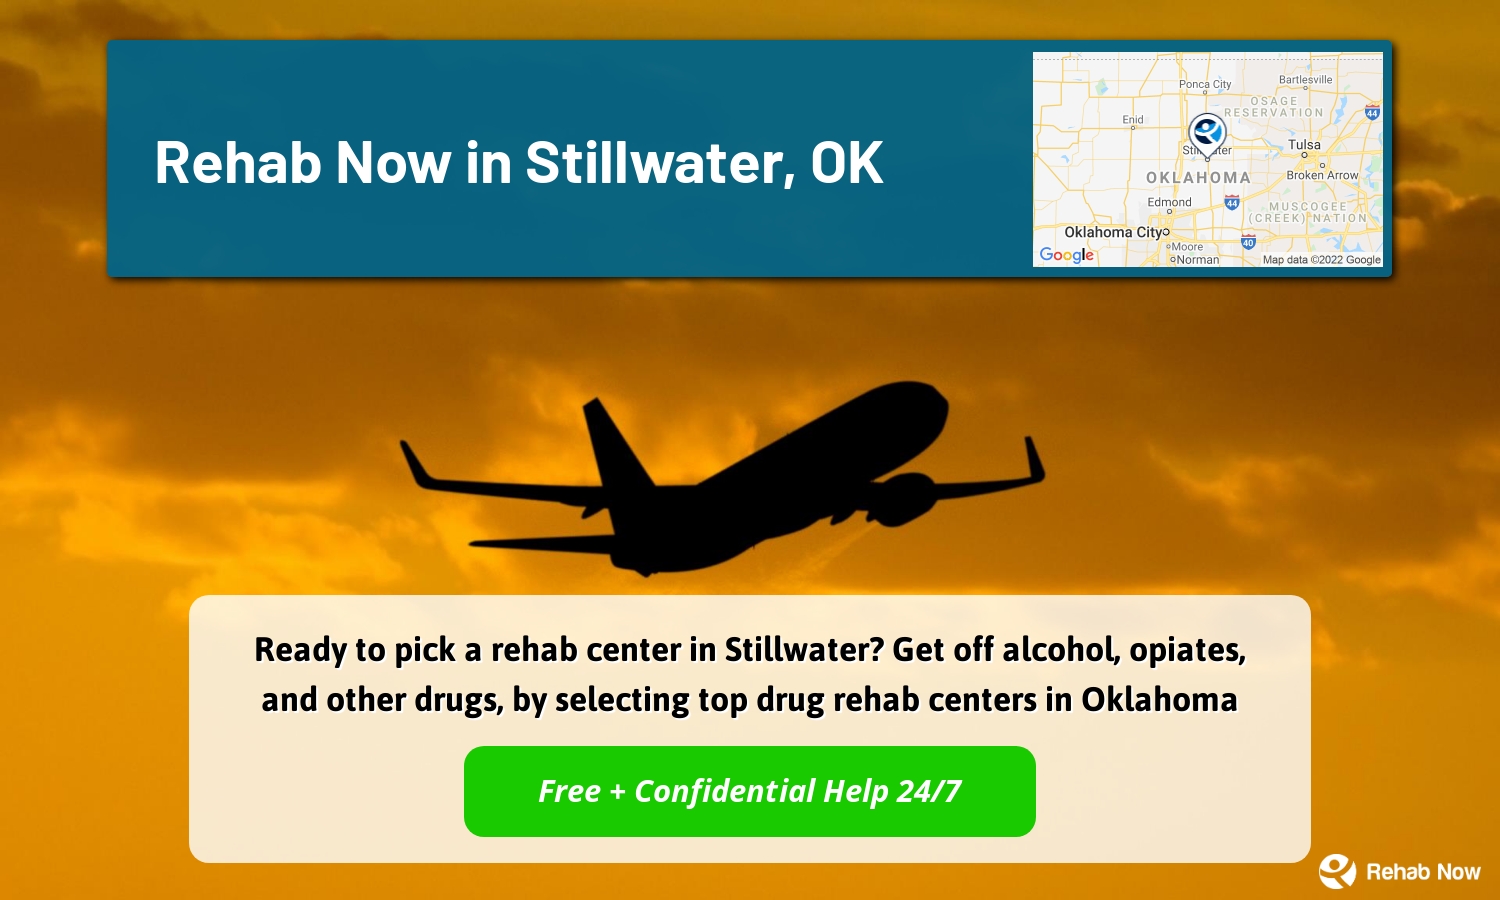 Ready to pick a rehab center in Stillwater? Get off alcohol, opiates, and other drugs, by selecting top drug rehab centers in Oklahoma